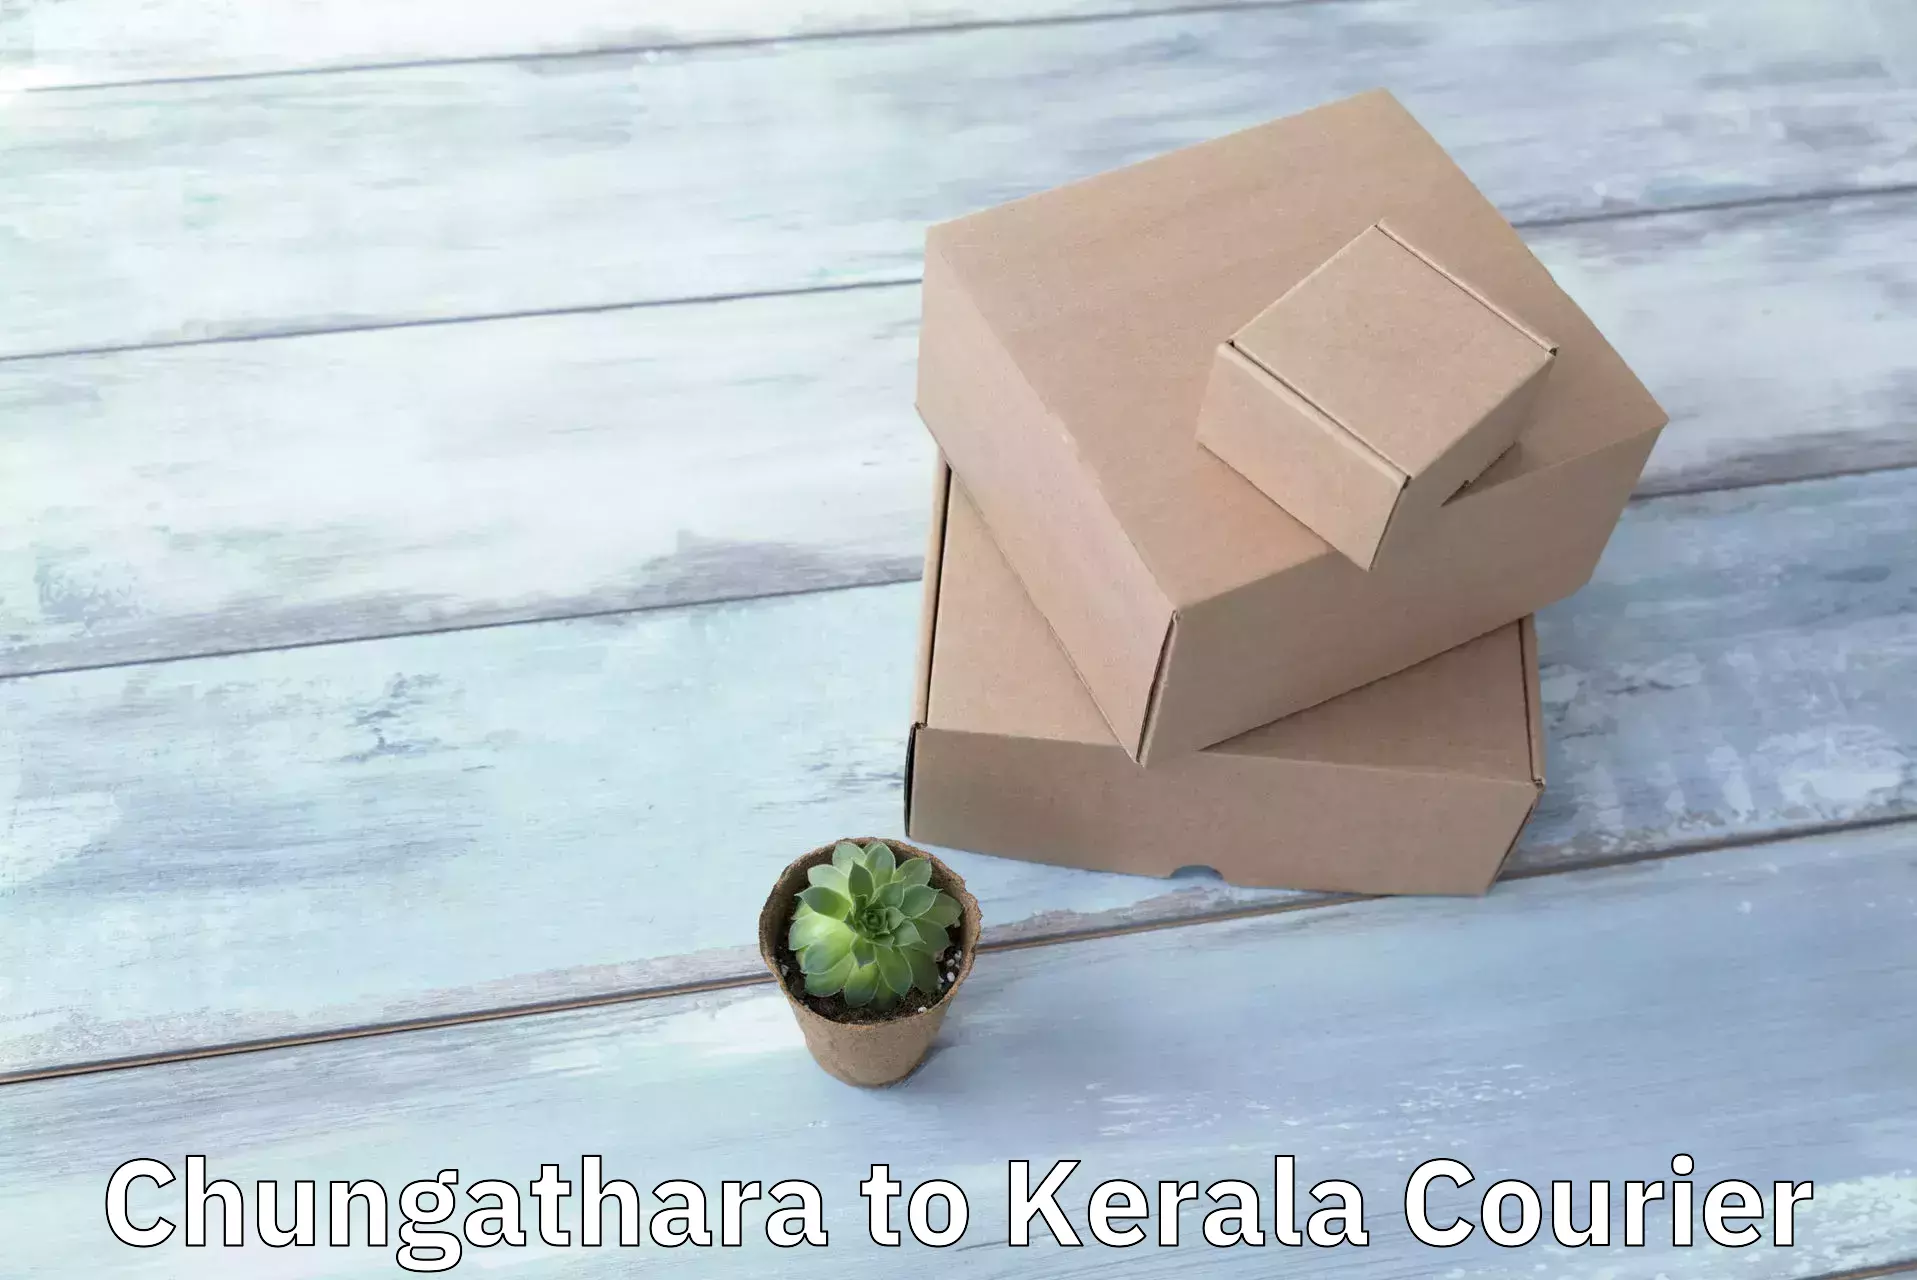 Package delivery network Chungathara to Poojapura